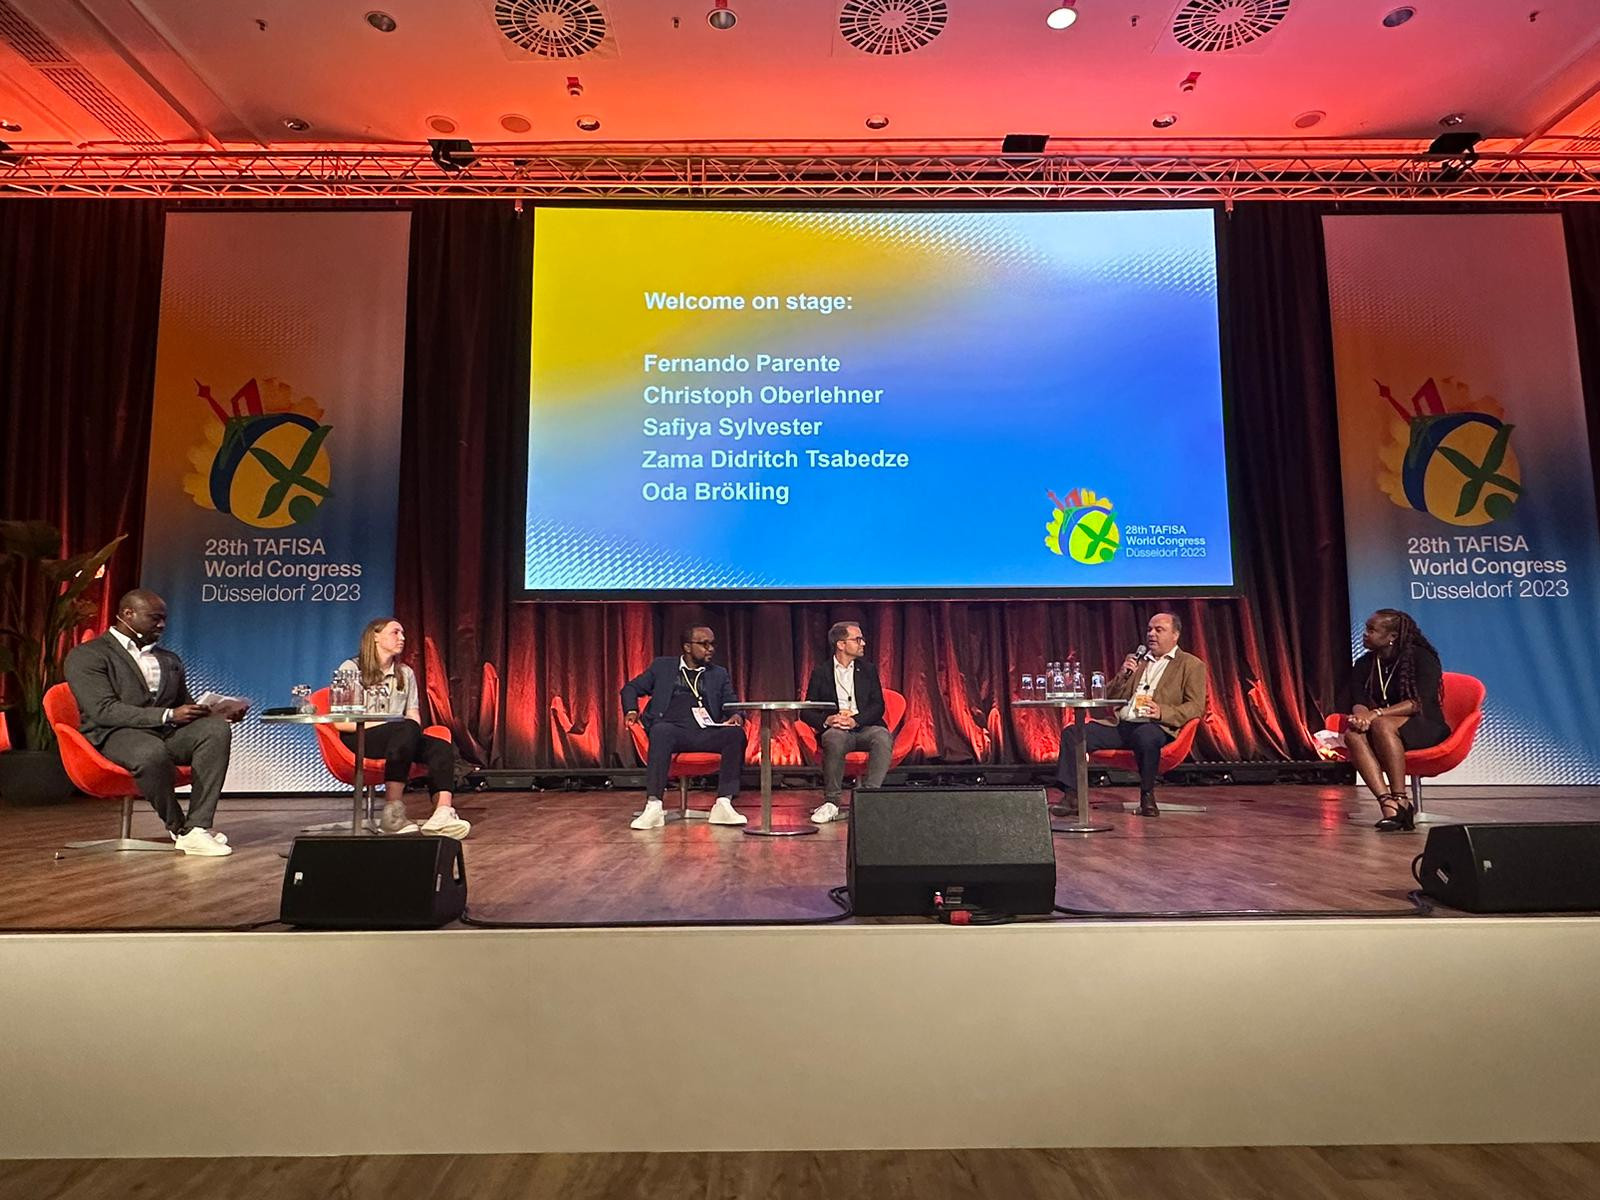 During the TAFISA Congress, Fernando Parente, Director of Development and Healthy Campus at FISU, stressed the importance of promoting sports for all